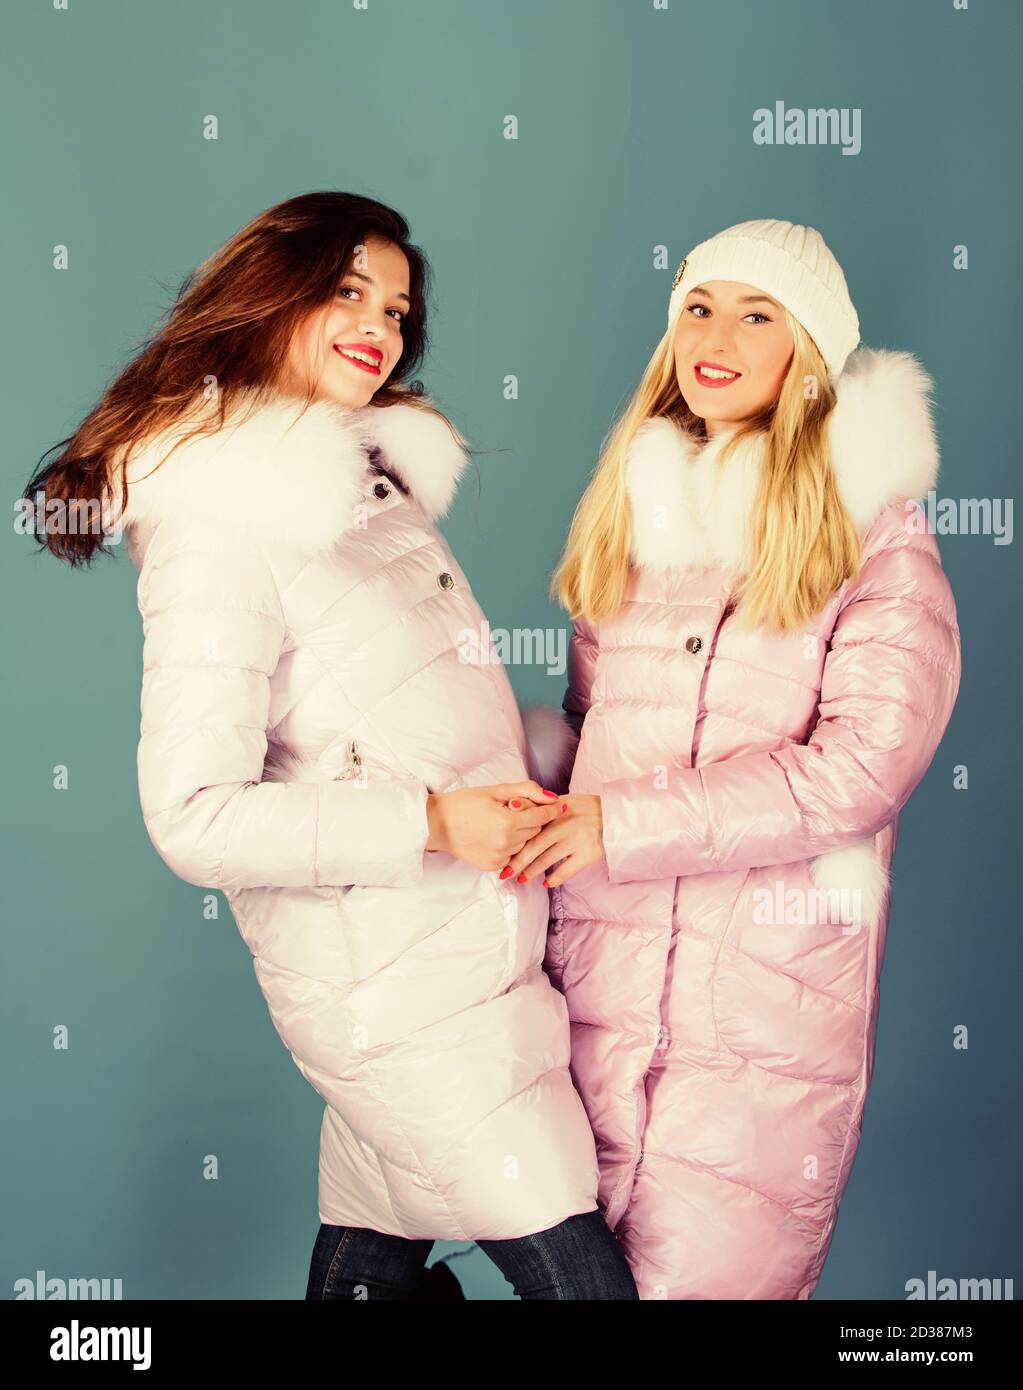 Fashion friends. Winter season. Soft fur. For those wishing stay modern. Winter  clothes. Women wear down jacket with furry hood. Girls smiling makeup faces wear  winter jackets blue background Stock Photo 